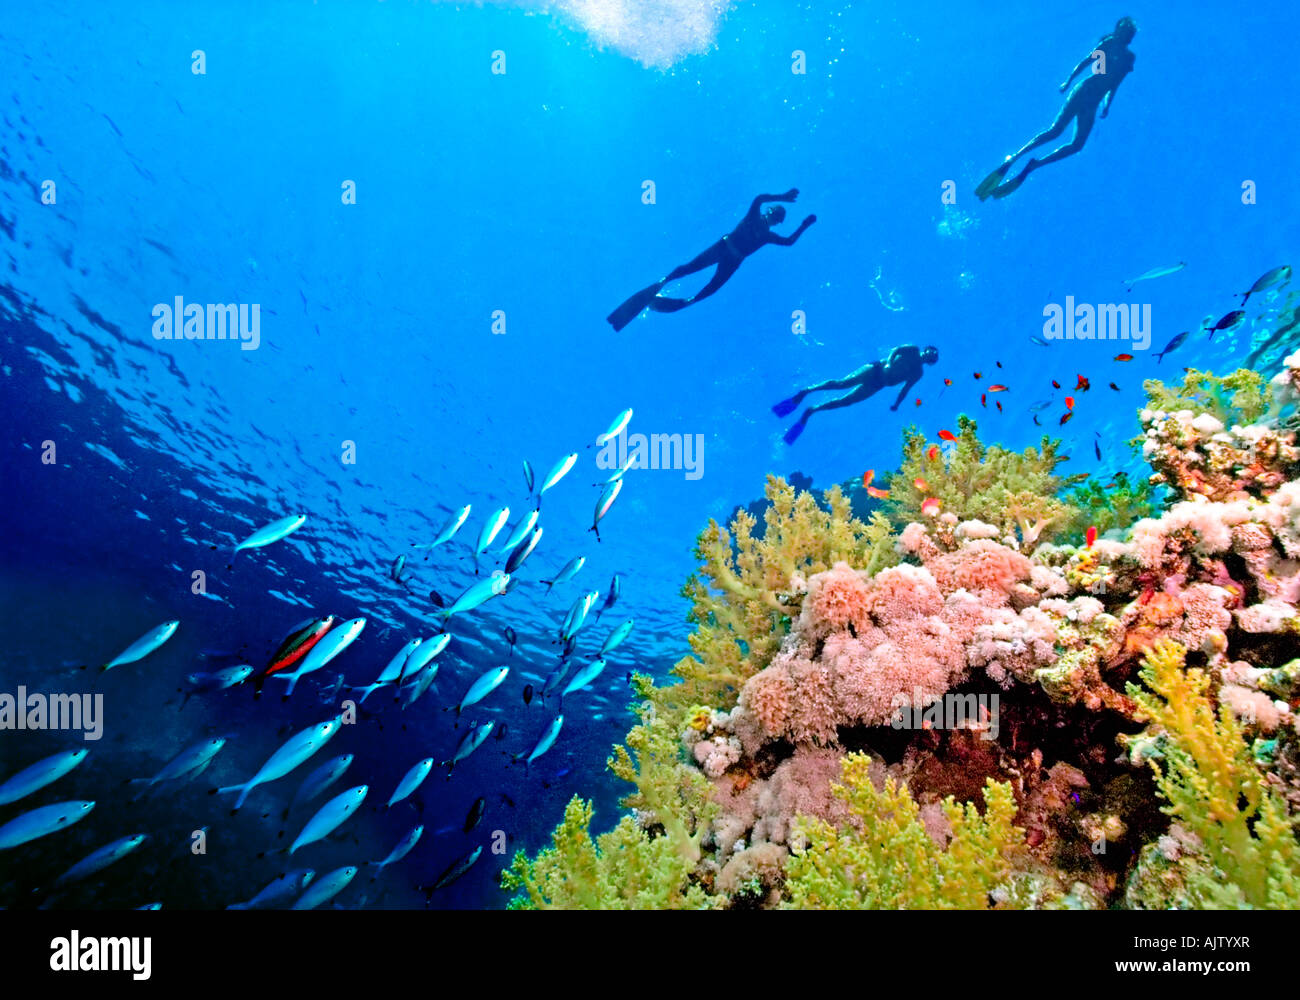 Surface swimmers and Lunar Fusiliers pass over a reef of soft broccoli coral near Sharm El Sheikh in the Egyptian Red Sea. Stock Photo